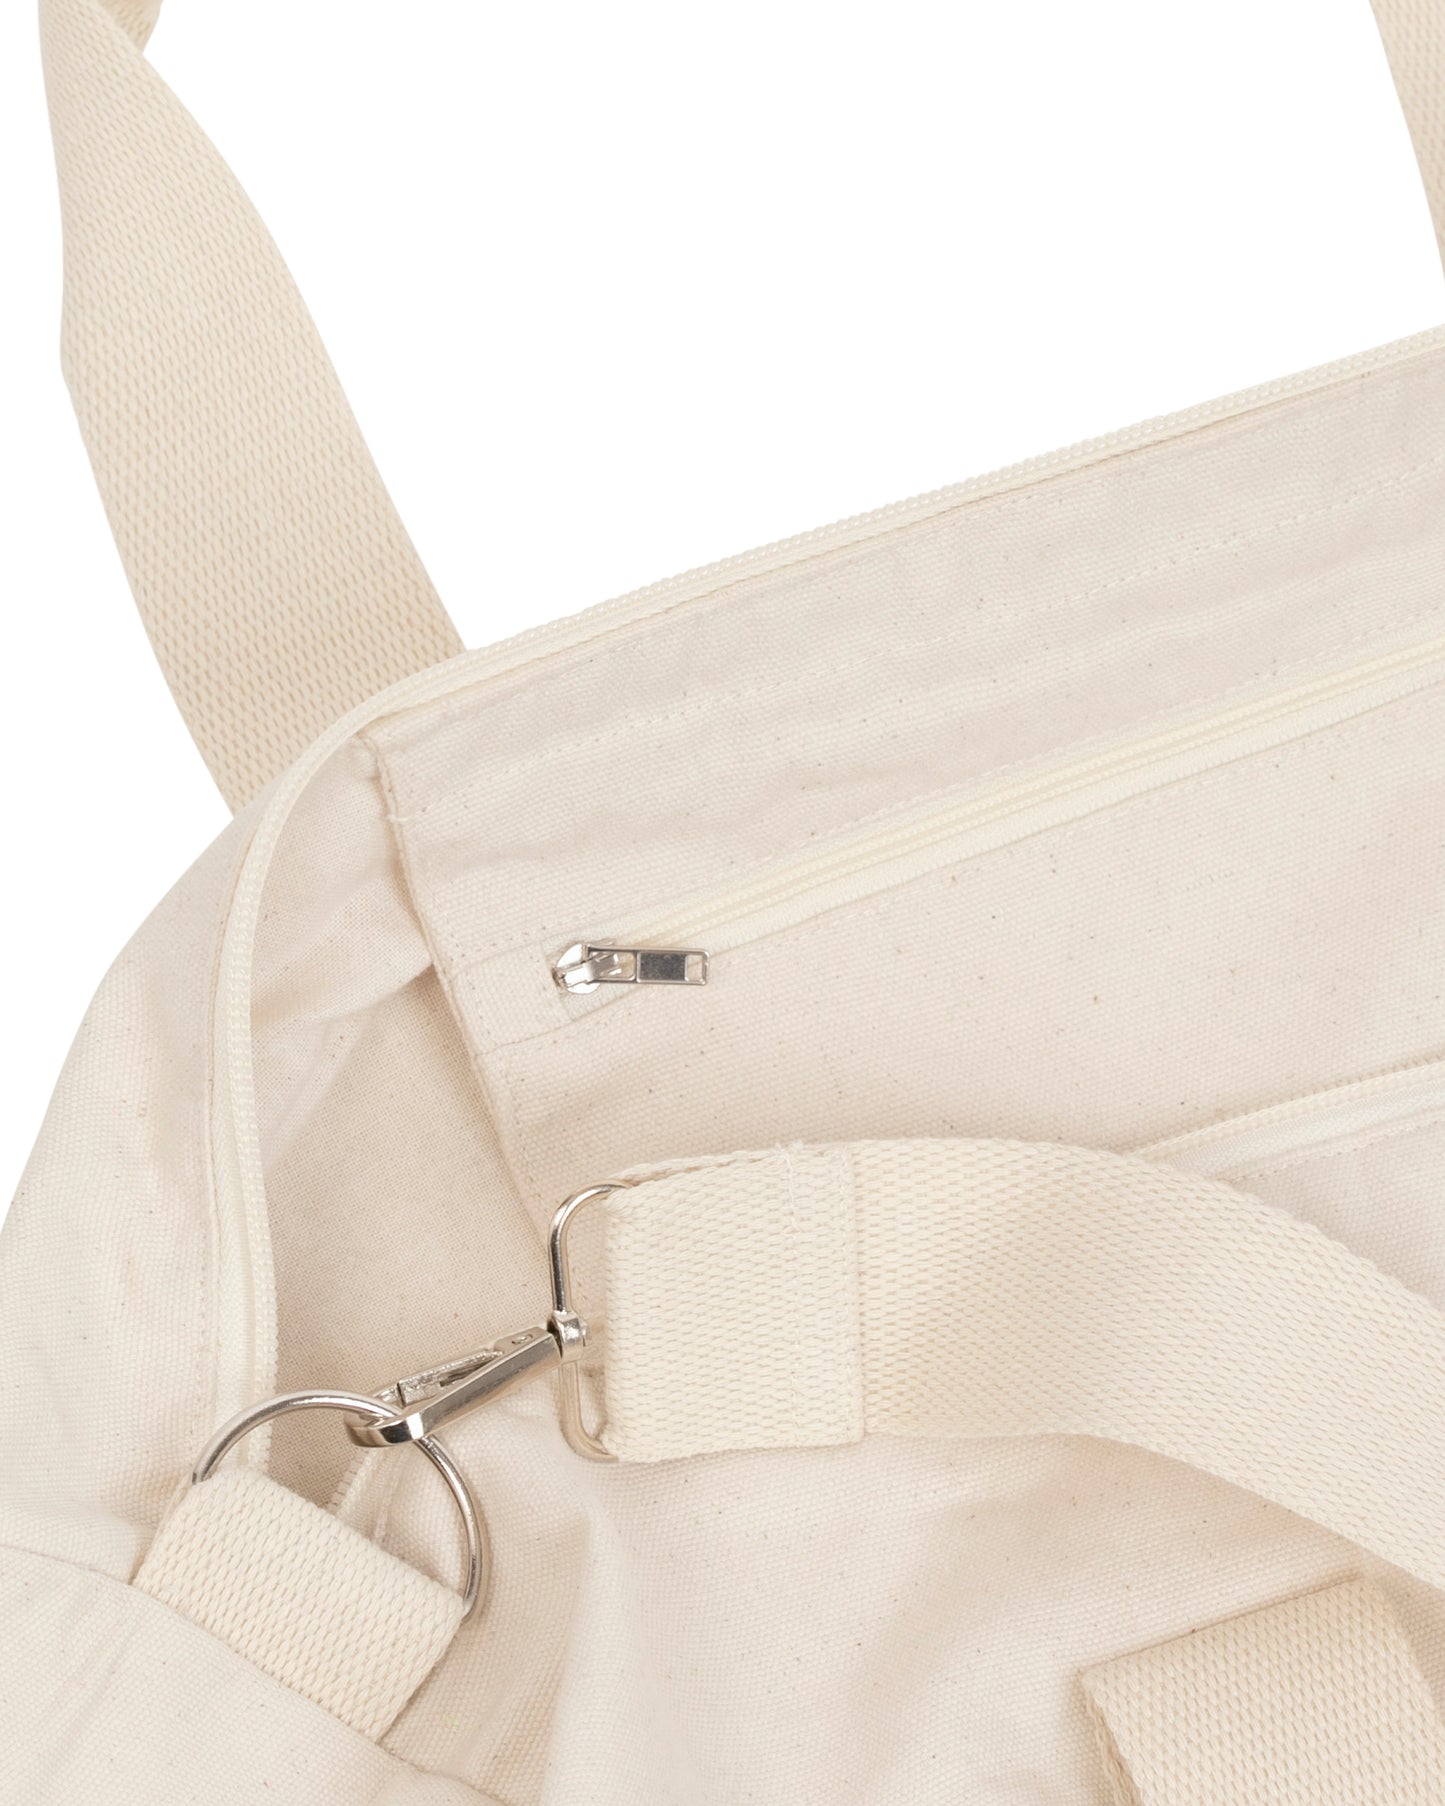 PIERRE BERGER - Duffle Bag 100% recycled stick